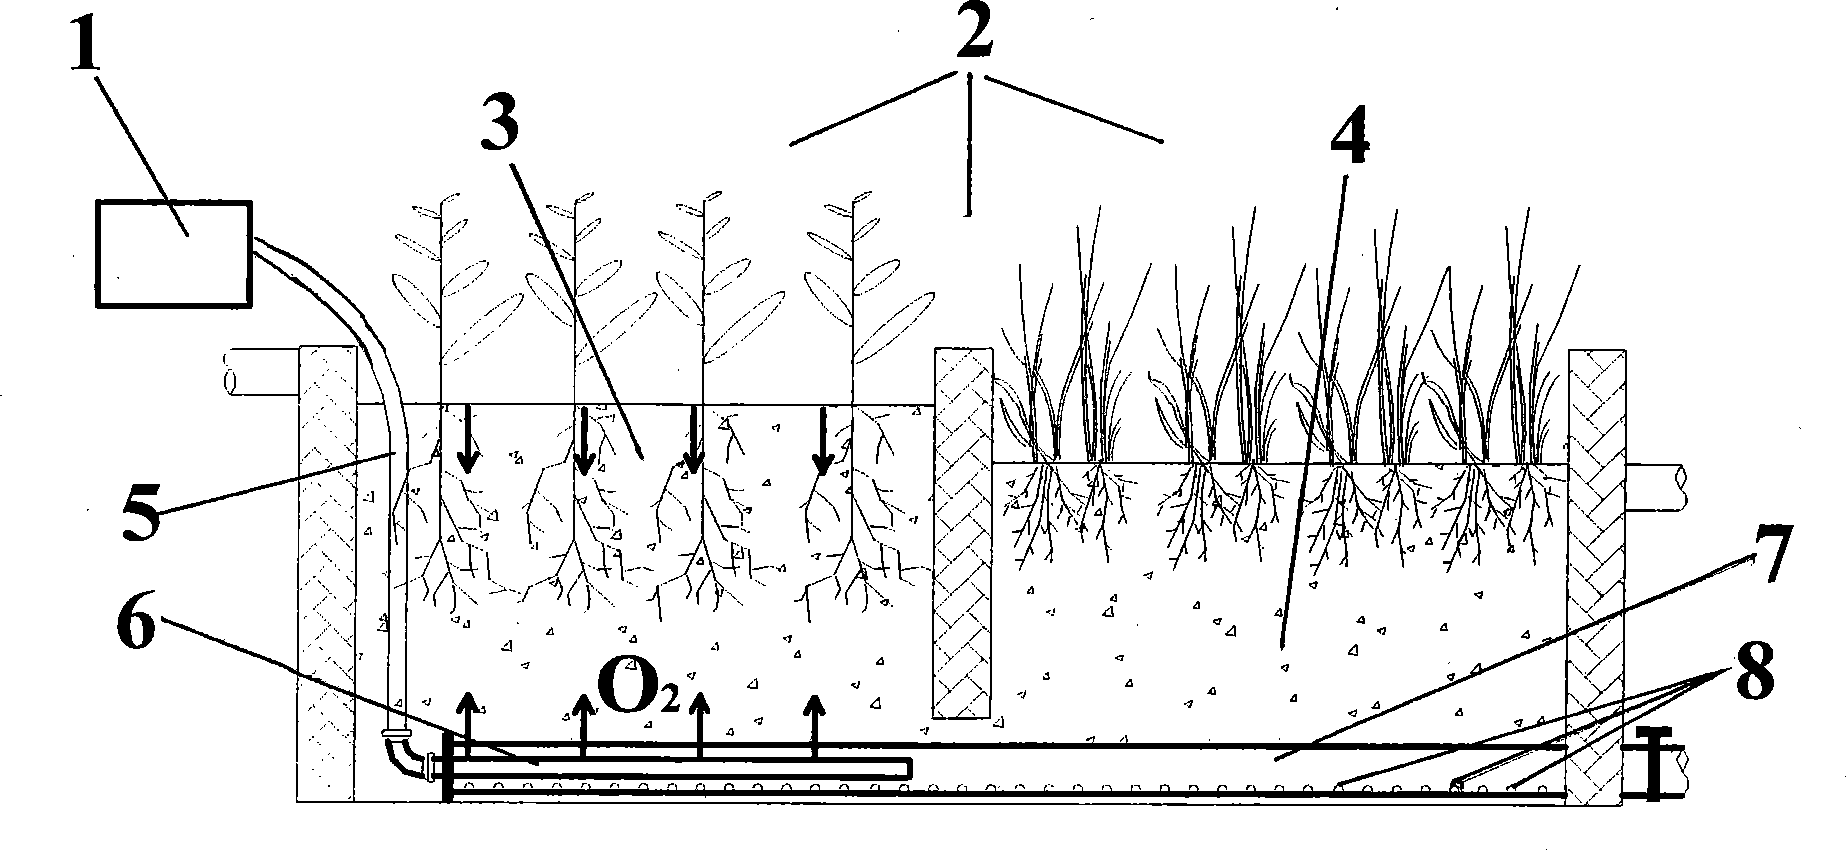 Composite vertical current artificial wetland oxygenation system